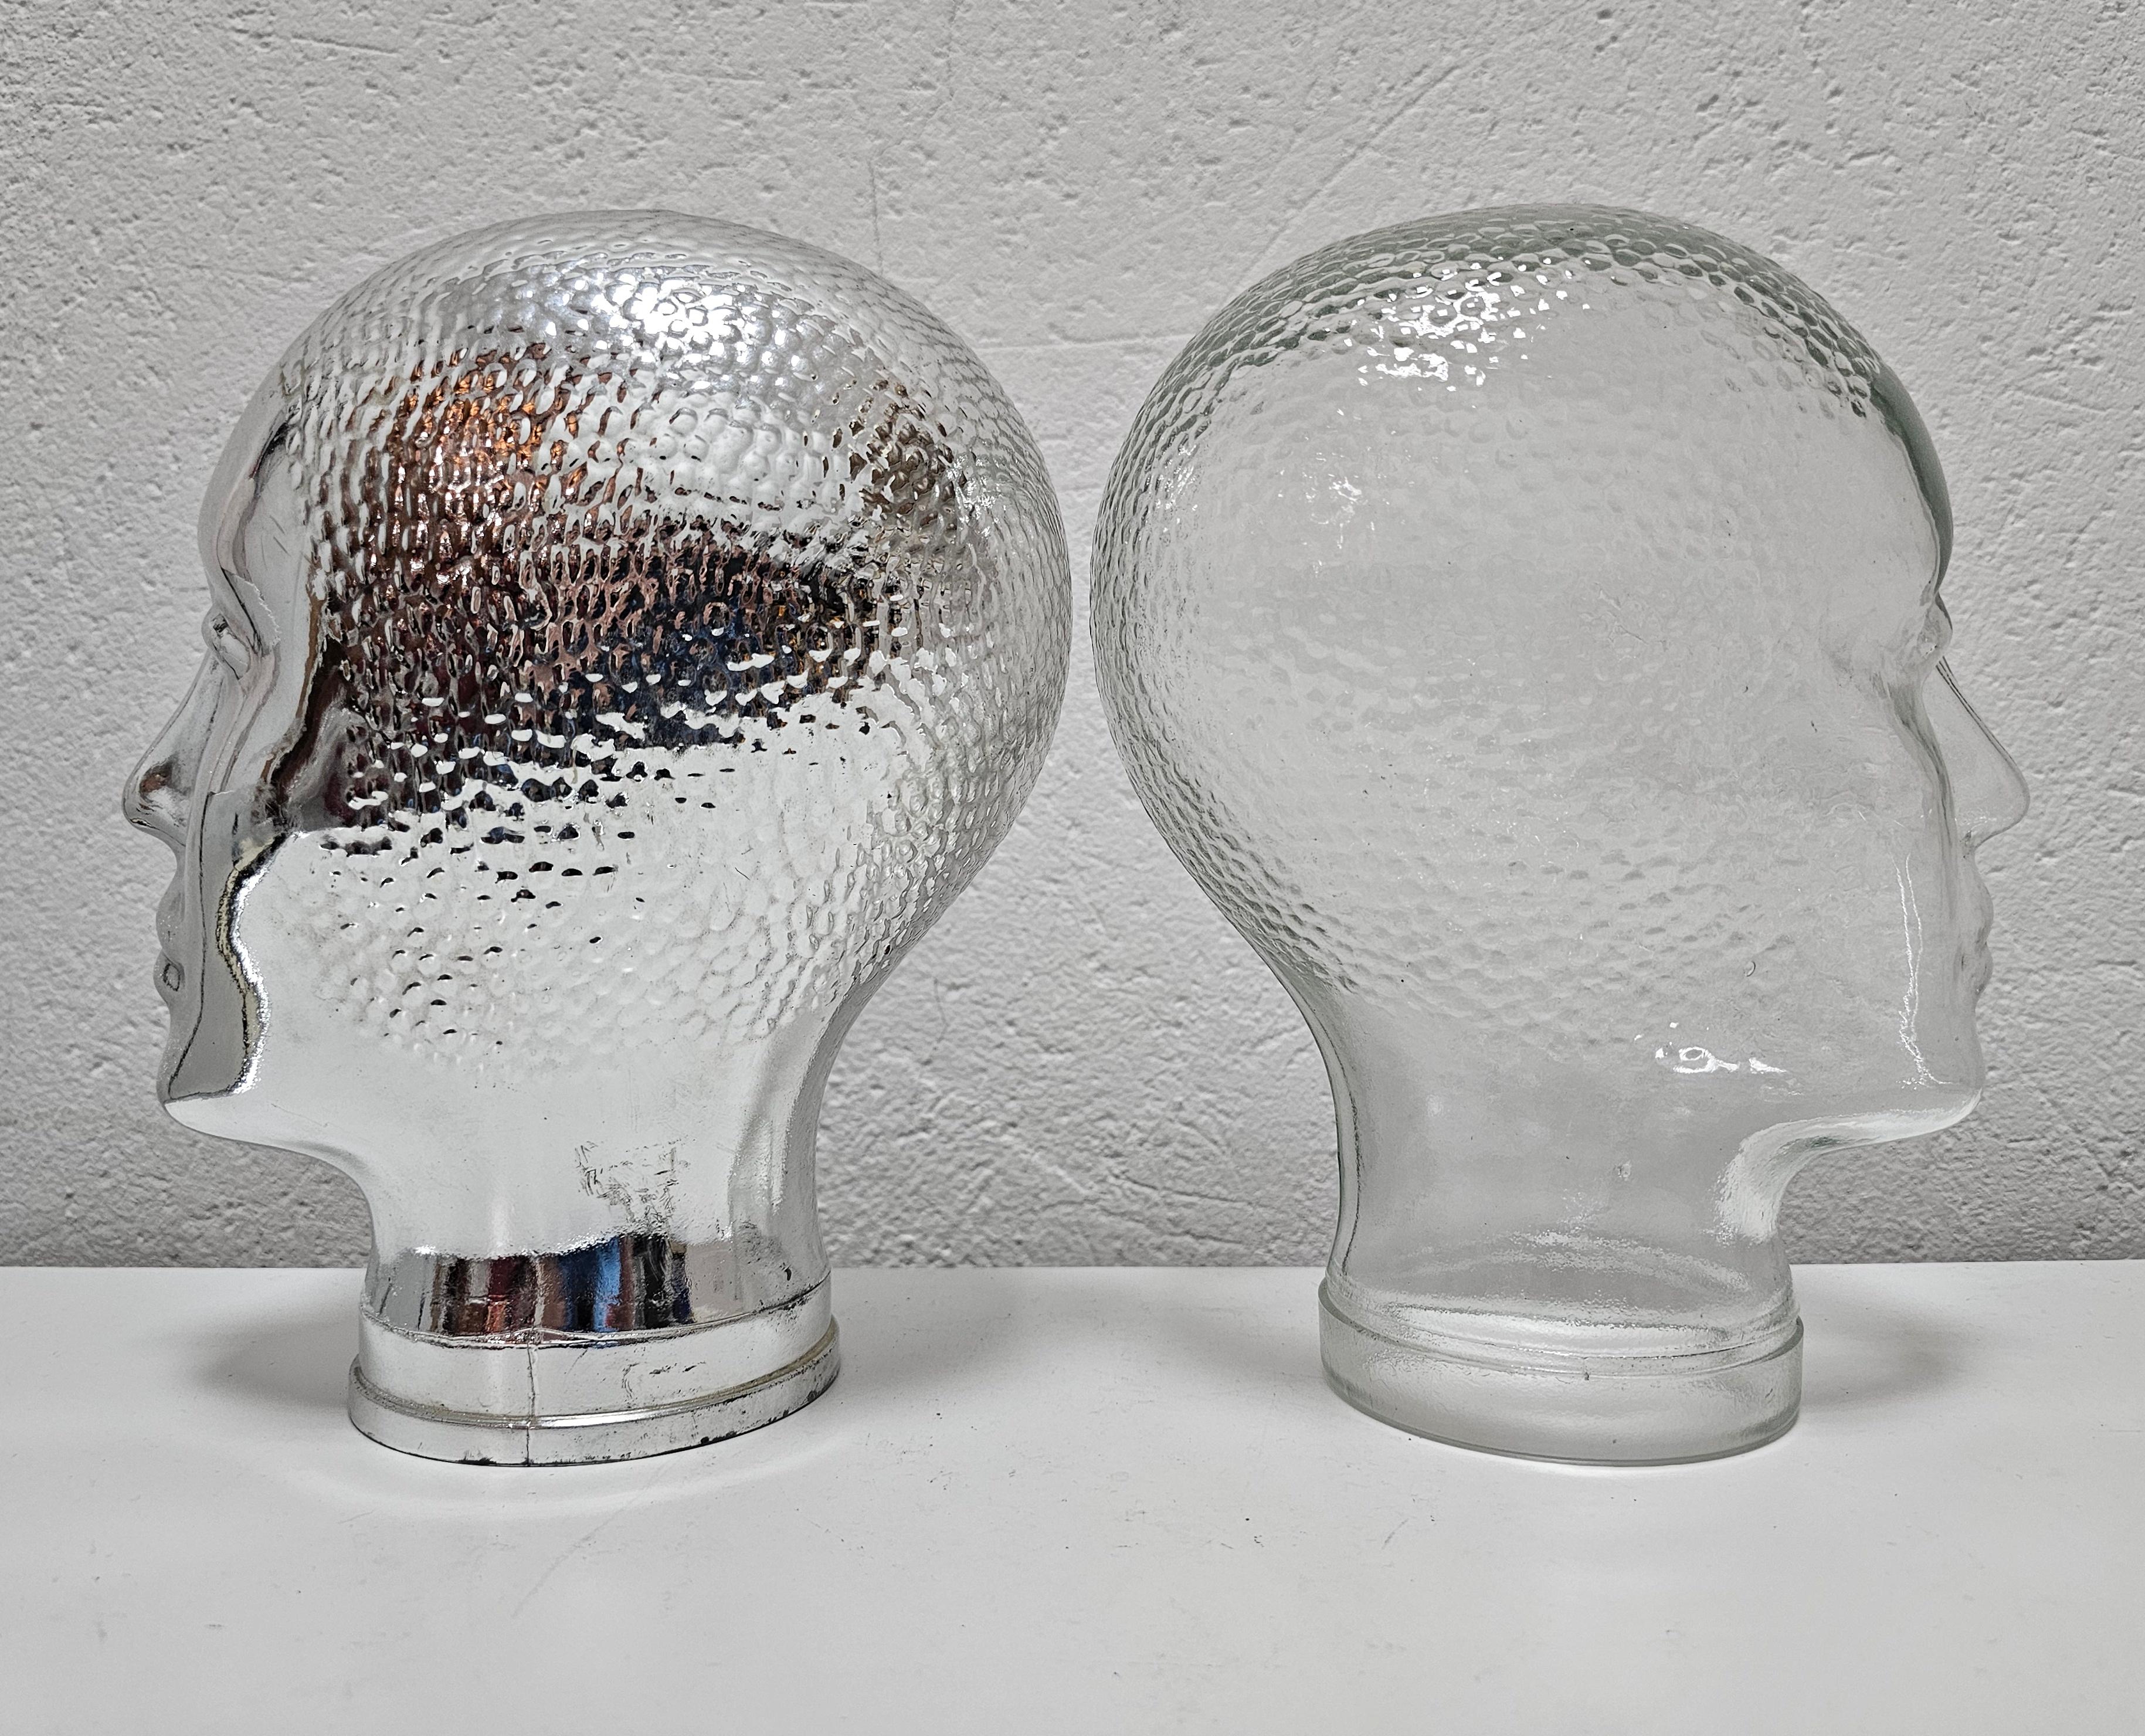 In this listing you will find a pair of Mid Century Modern mannequin glass heads, renowned Italian designer. One head is done in clear and the other in silver glass. Made in Italy in 1960s.

Very good vintage condition. There are no dents on the